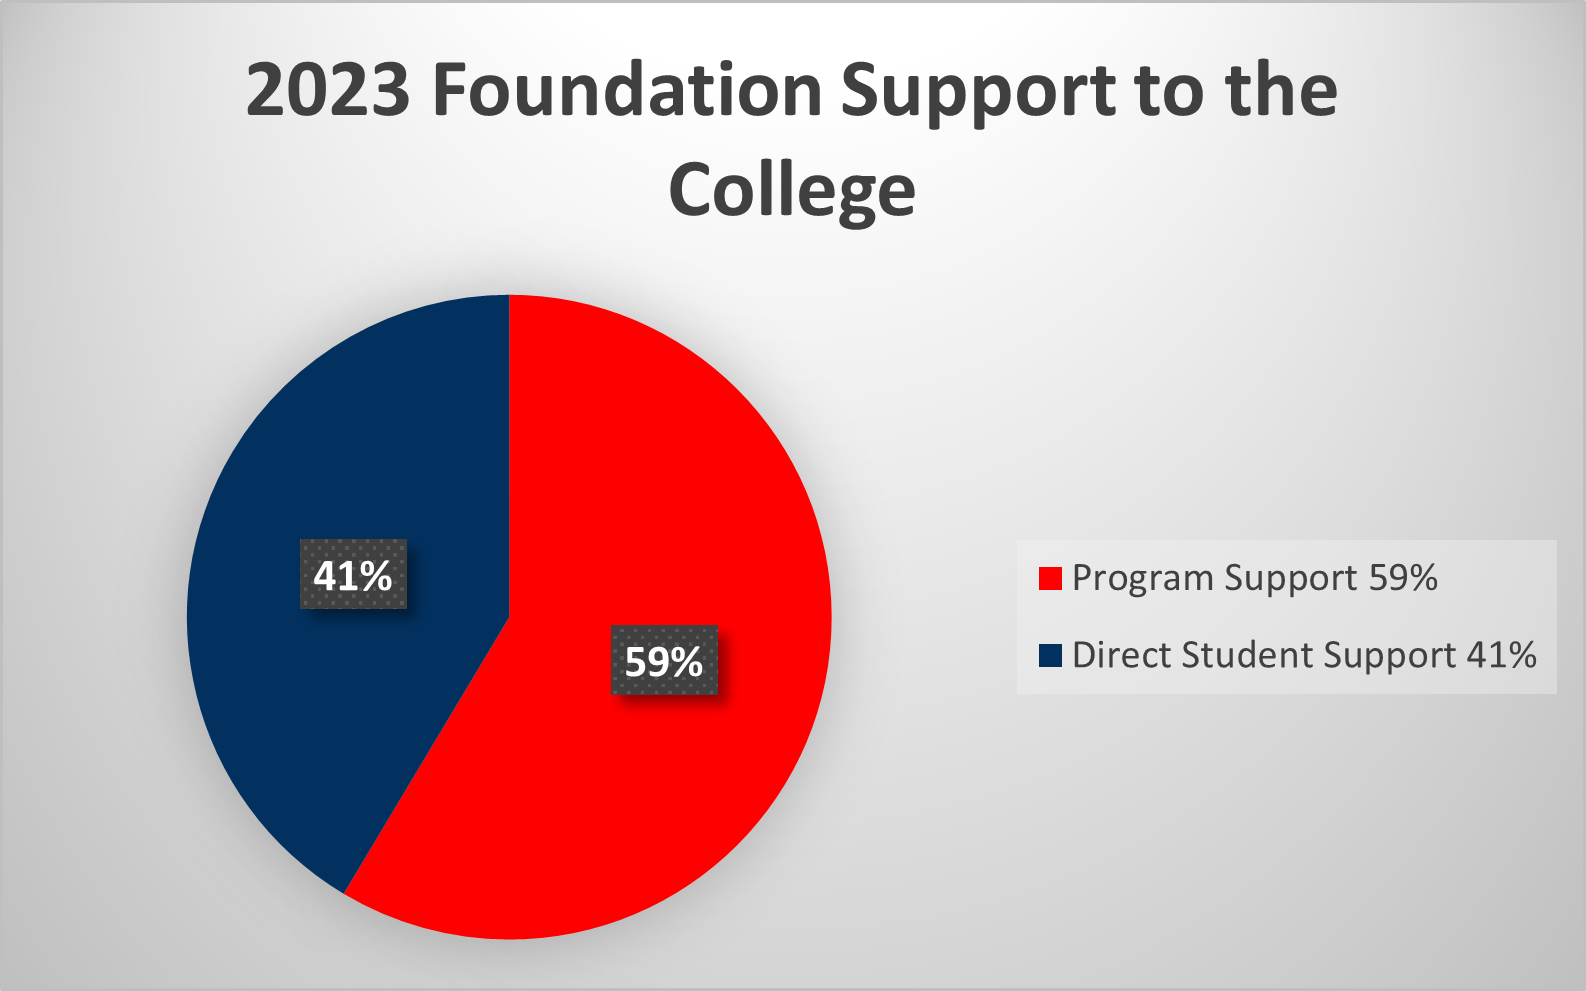 2023 Foundation Support to the College: 59% Program support, 41% direct student support